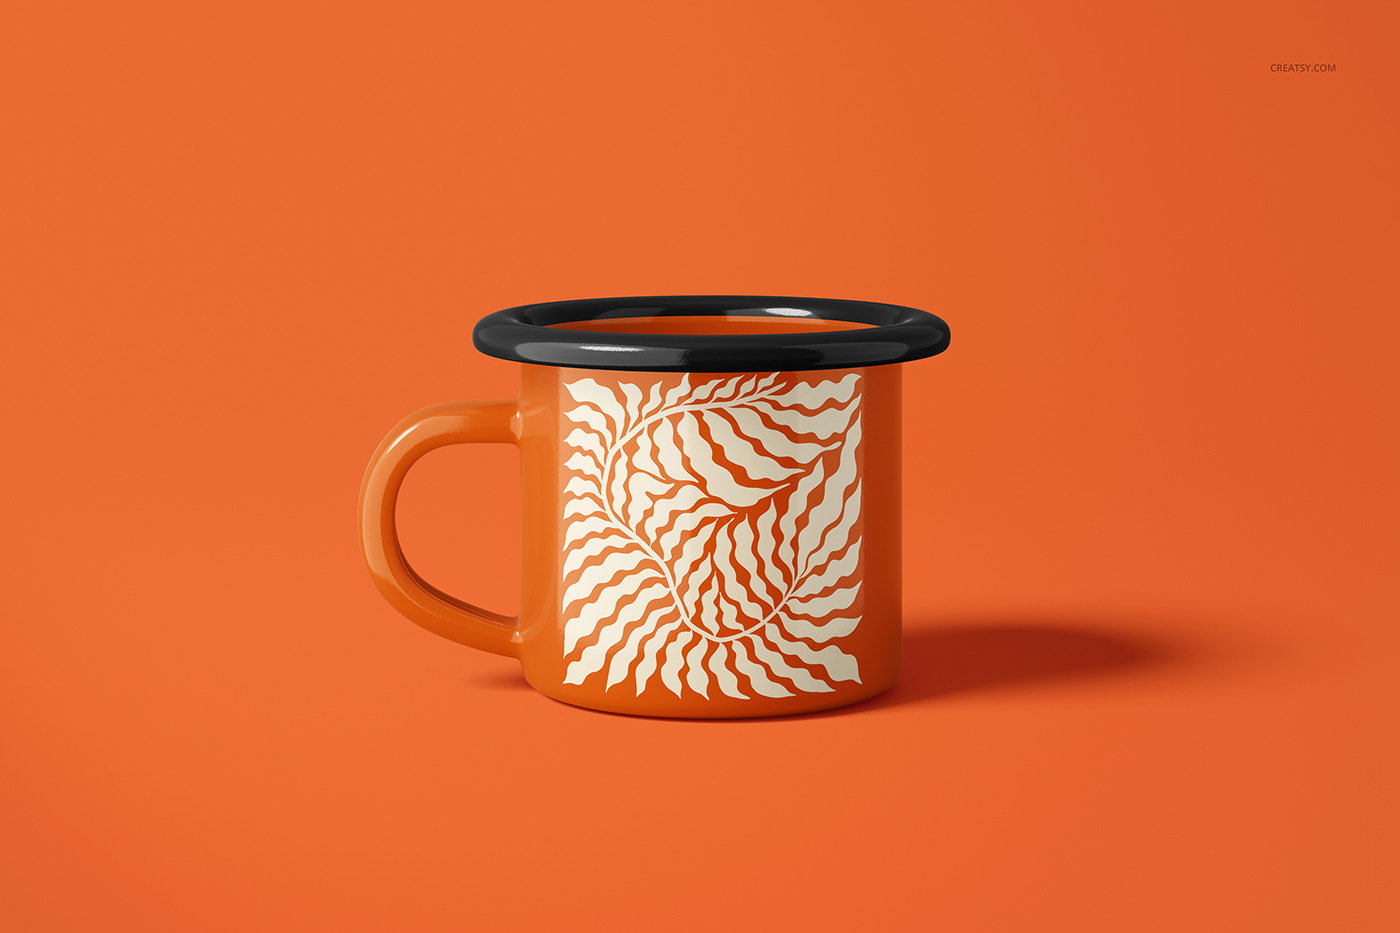 mock-up Mockup template creatsy Mugs camping cups cup sublimation vintage